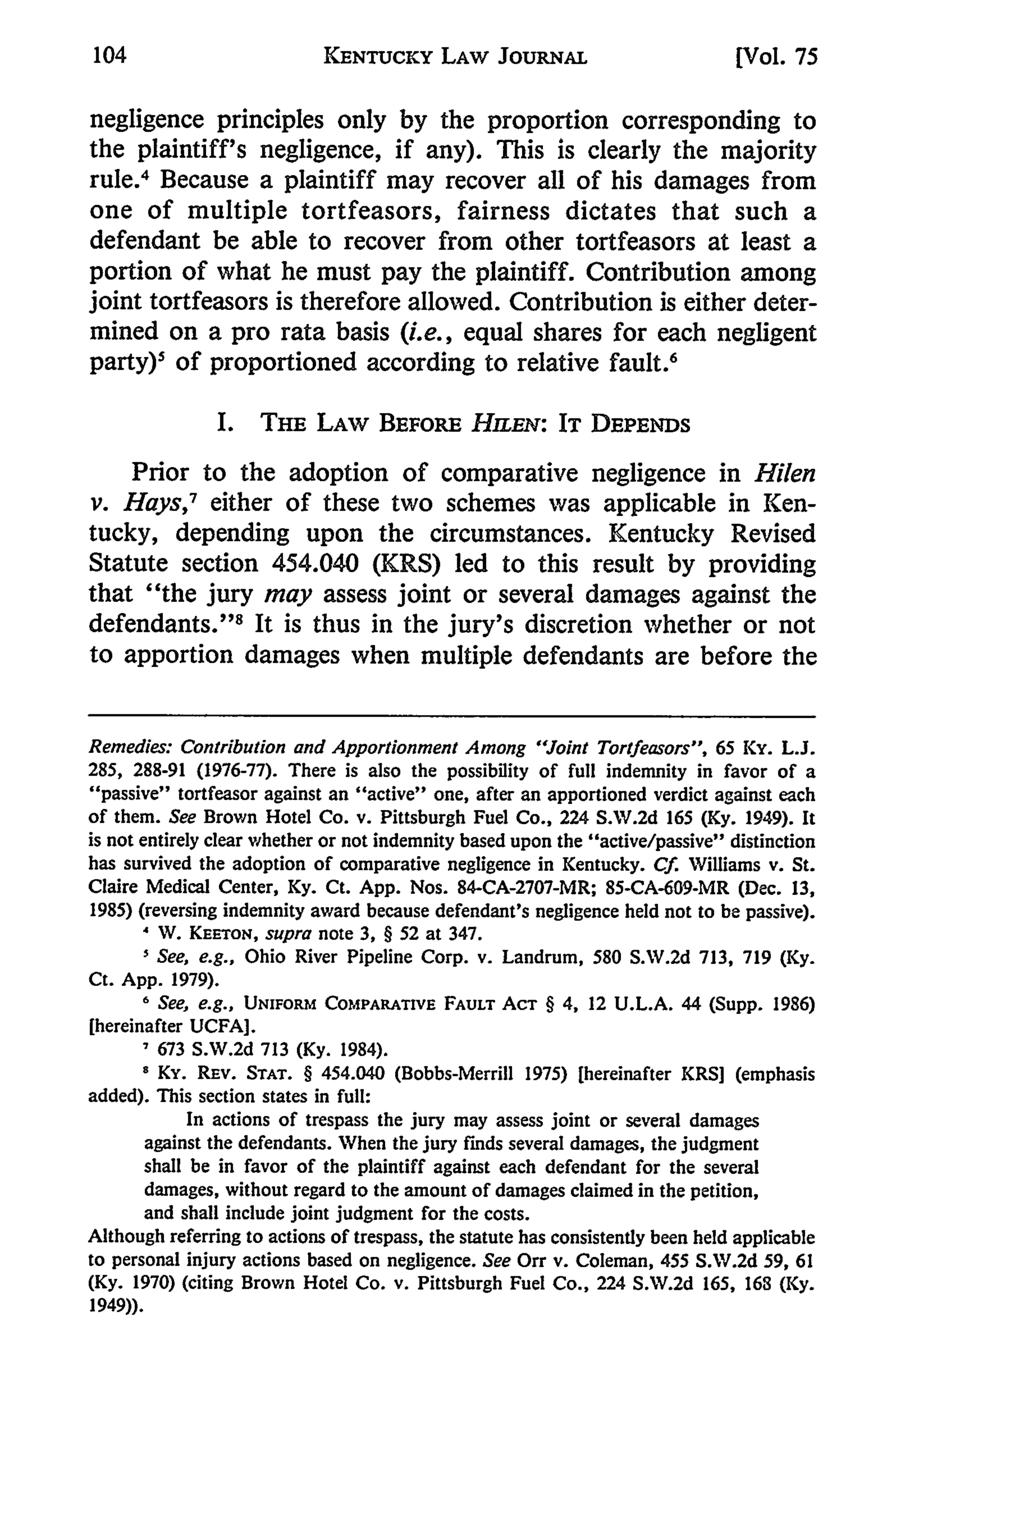 KENTUCKY LAW JouRNAL [Vol. 75 negligence principles only by the proportion corresponding to the plaintiff's negligence, if any). This is clearly the majority rule.